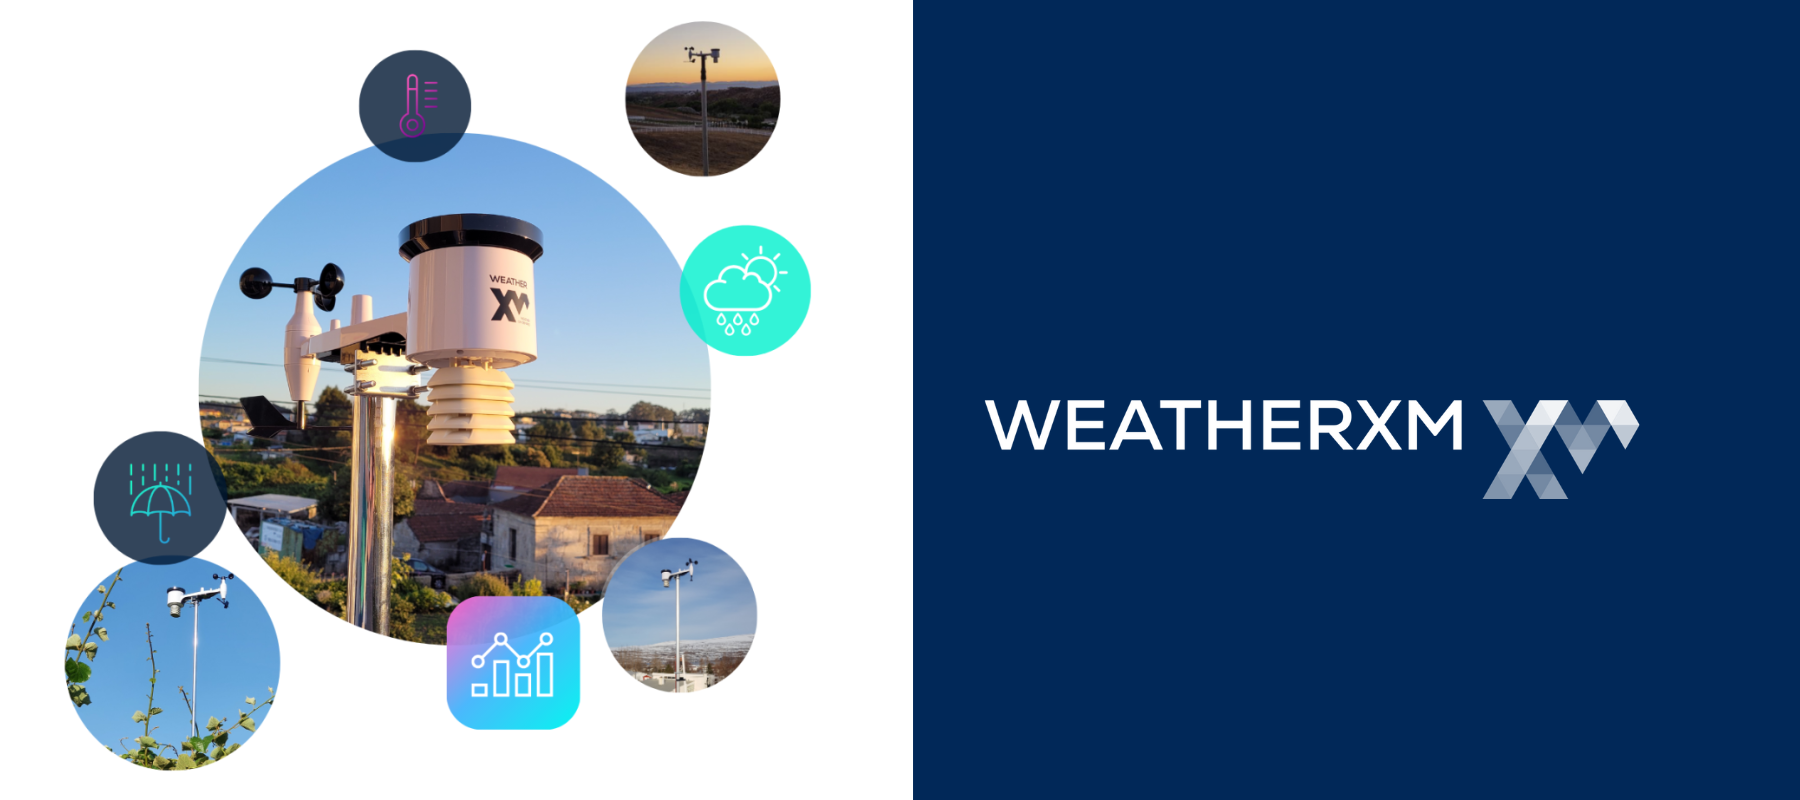 Swiss startup WeatherXM raises $7.7m to become the largest weather network in the world